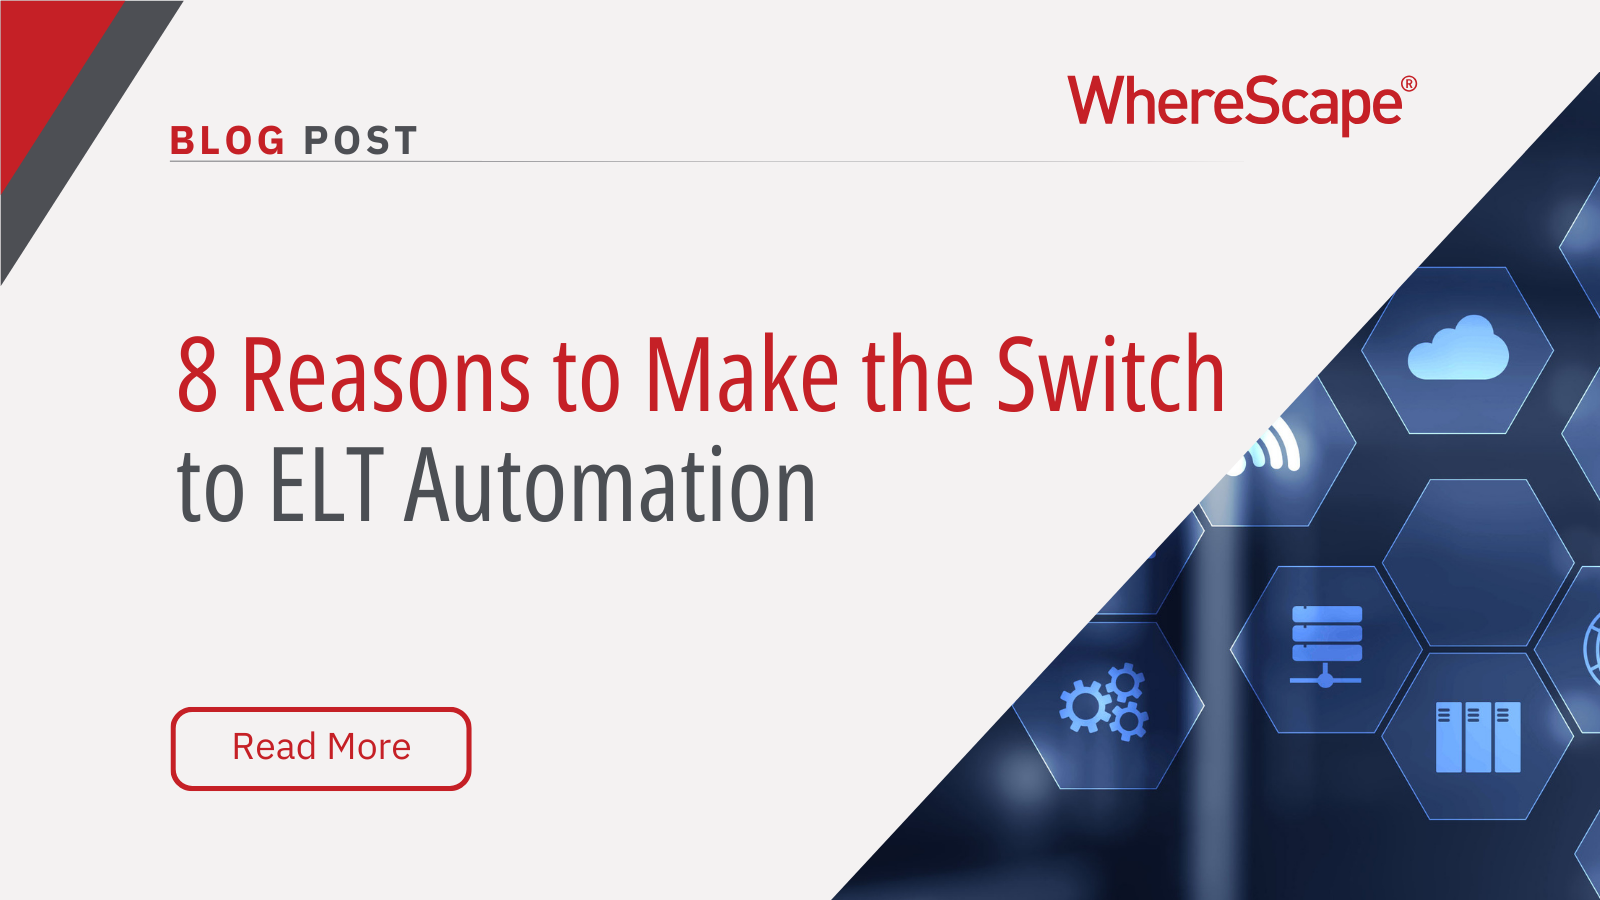 8 Reasons to Make the Switch to ELT Automation